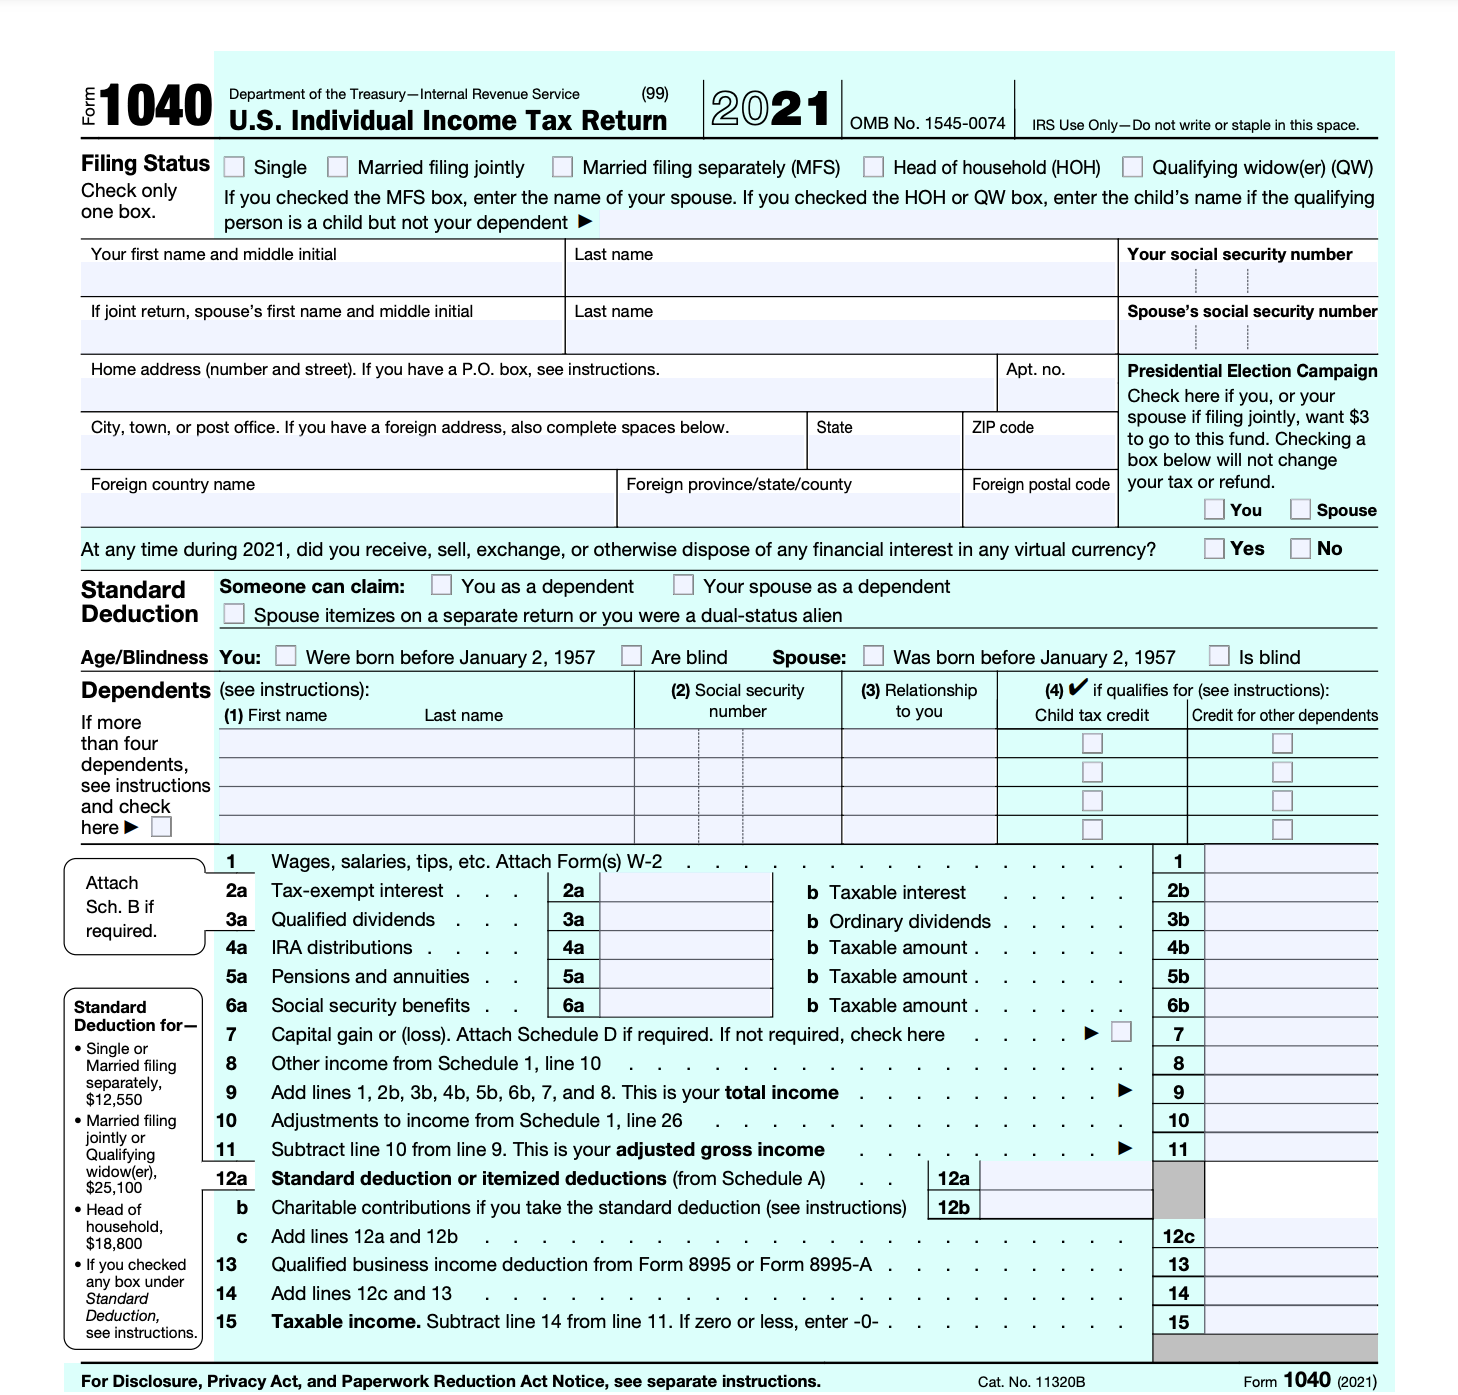 1040 tax form filled out